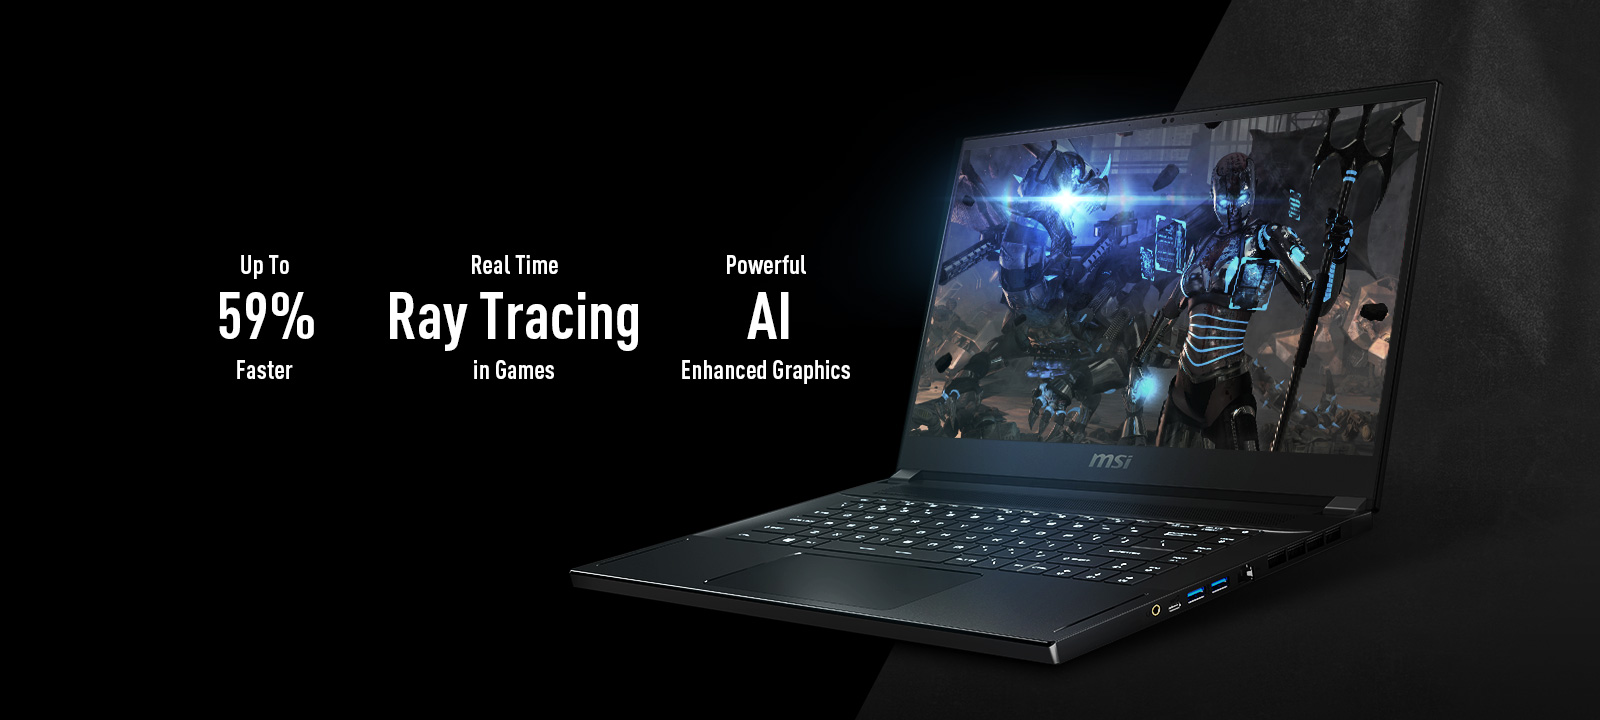 GS66 Stealth widely opened to left. An art background is on the screen. Text left it says: Up to 59% faster, Real Time Ray Tracing in Games, Powerful AI Enhanced Graphics